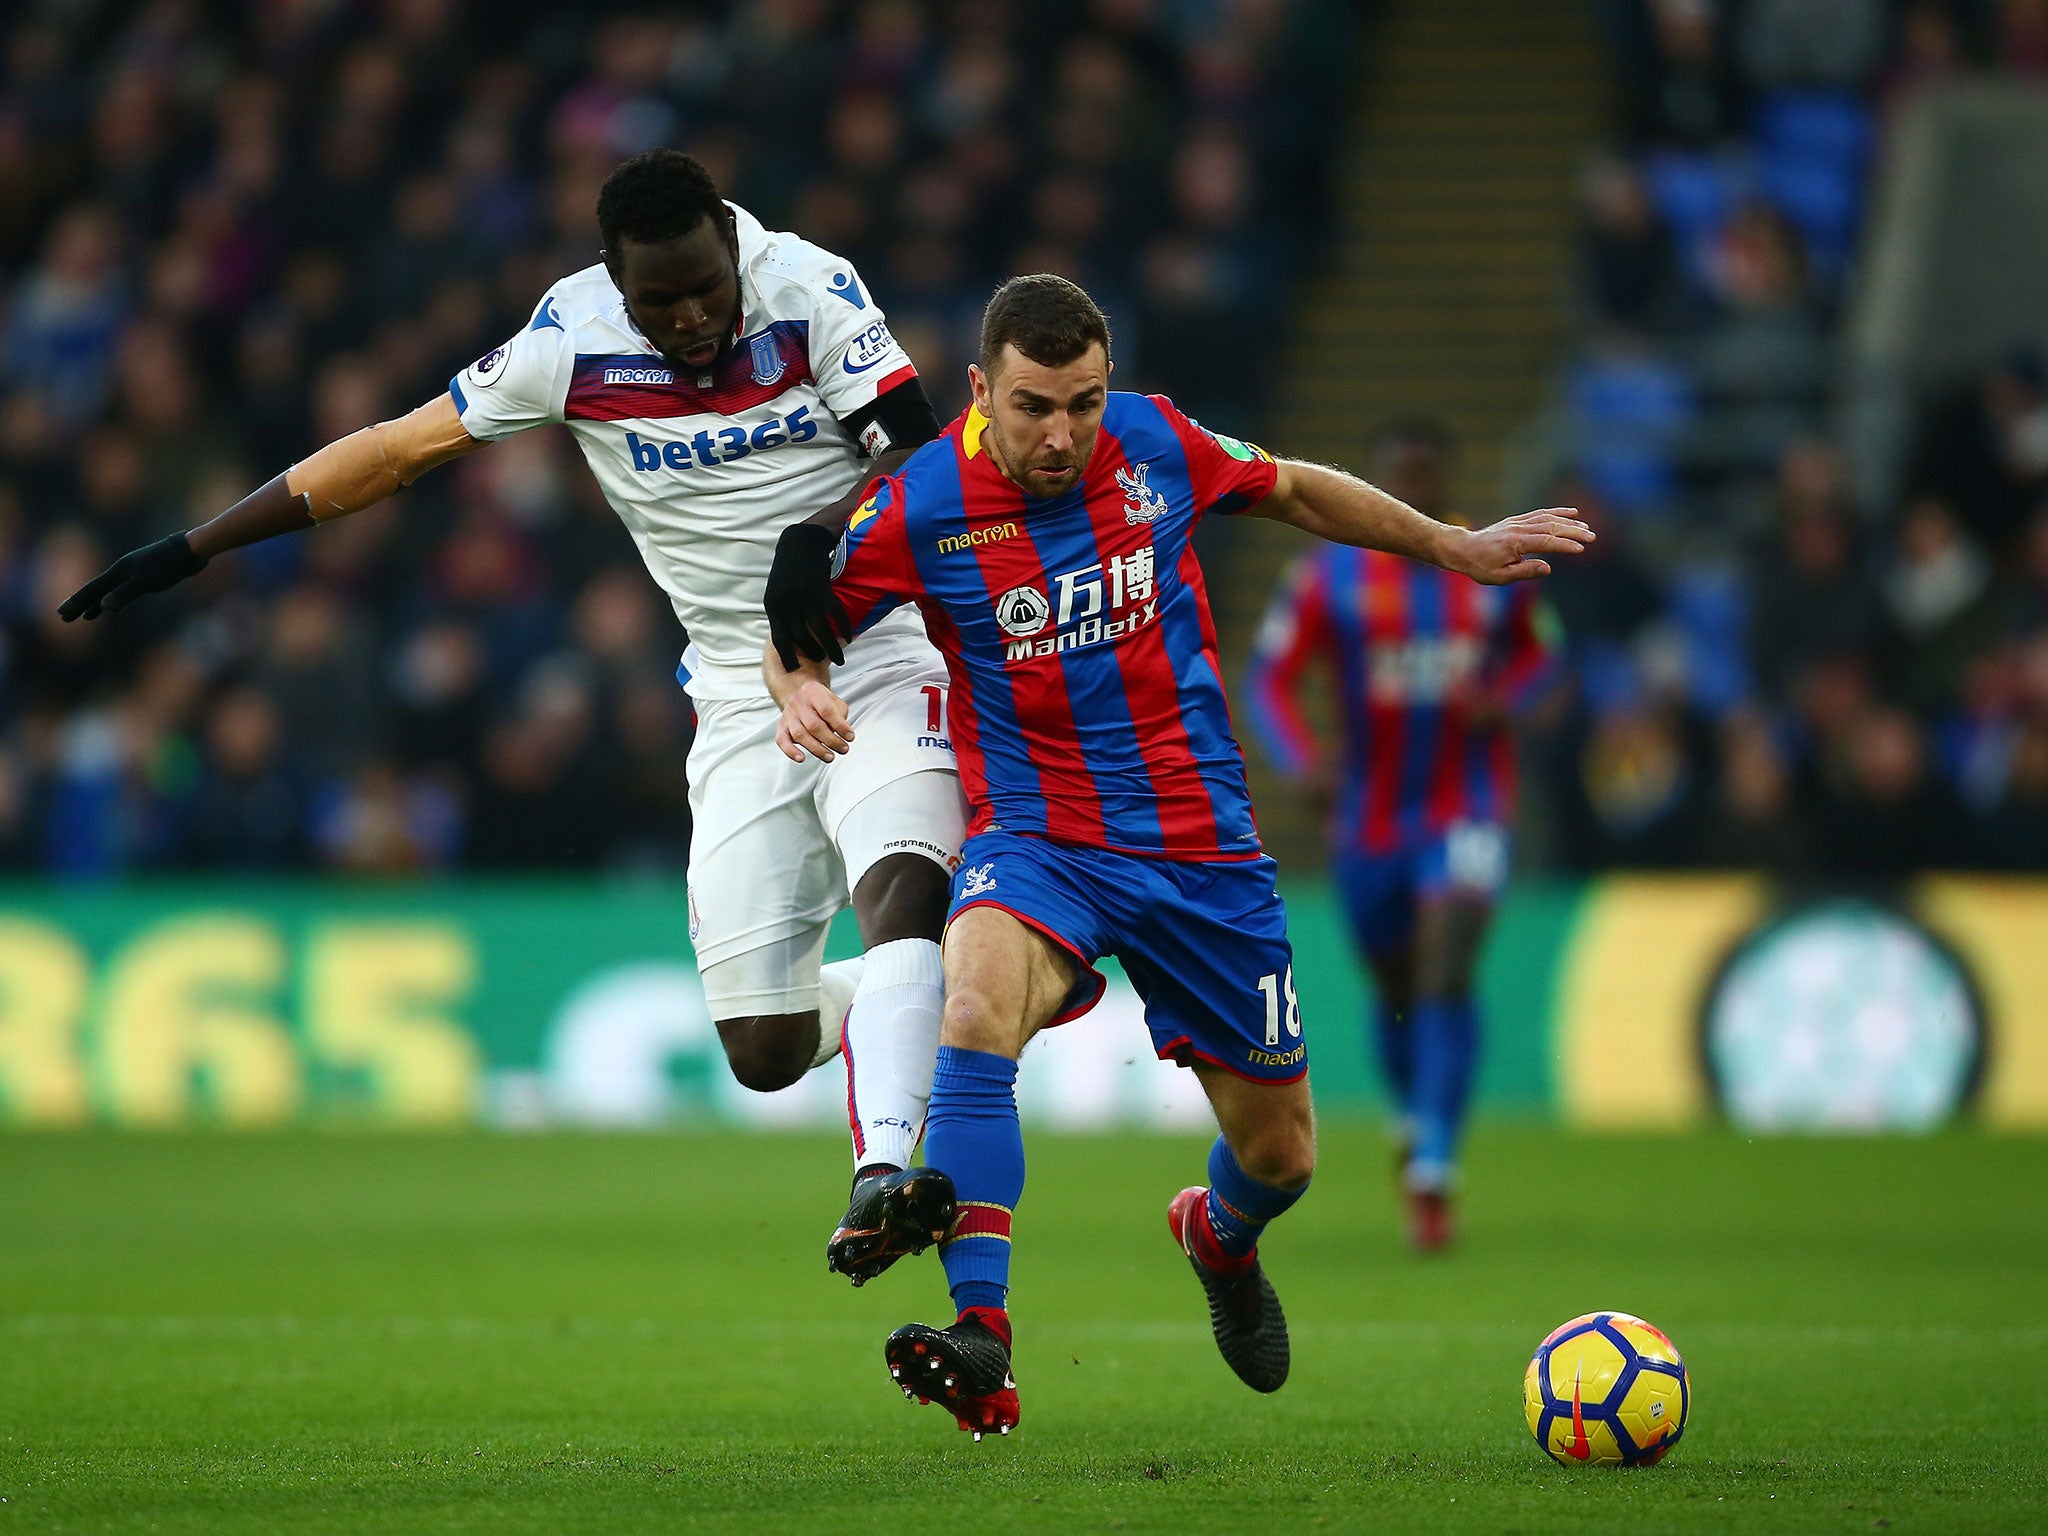 James McArthur and Mame Biram Diouf tussle for possession